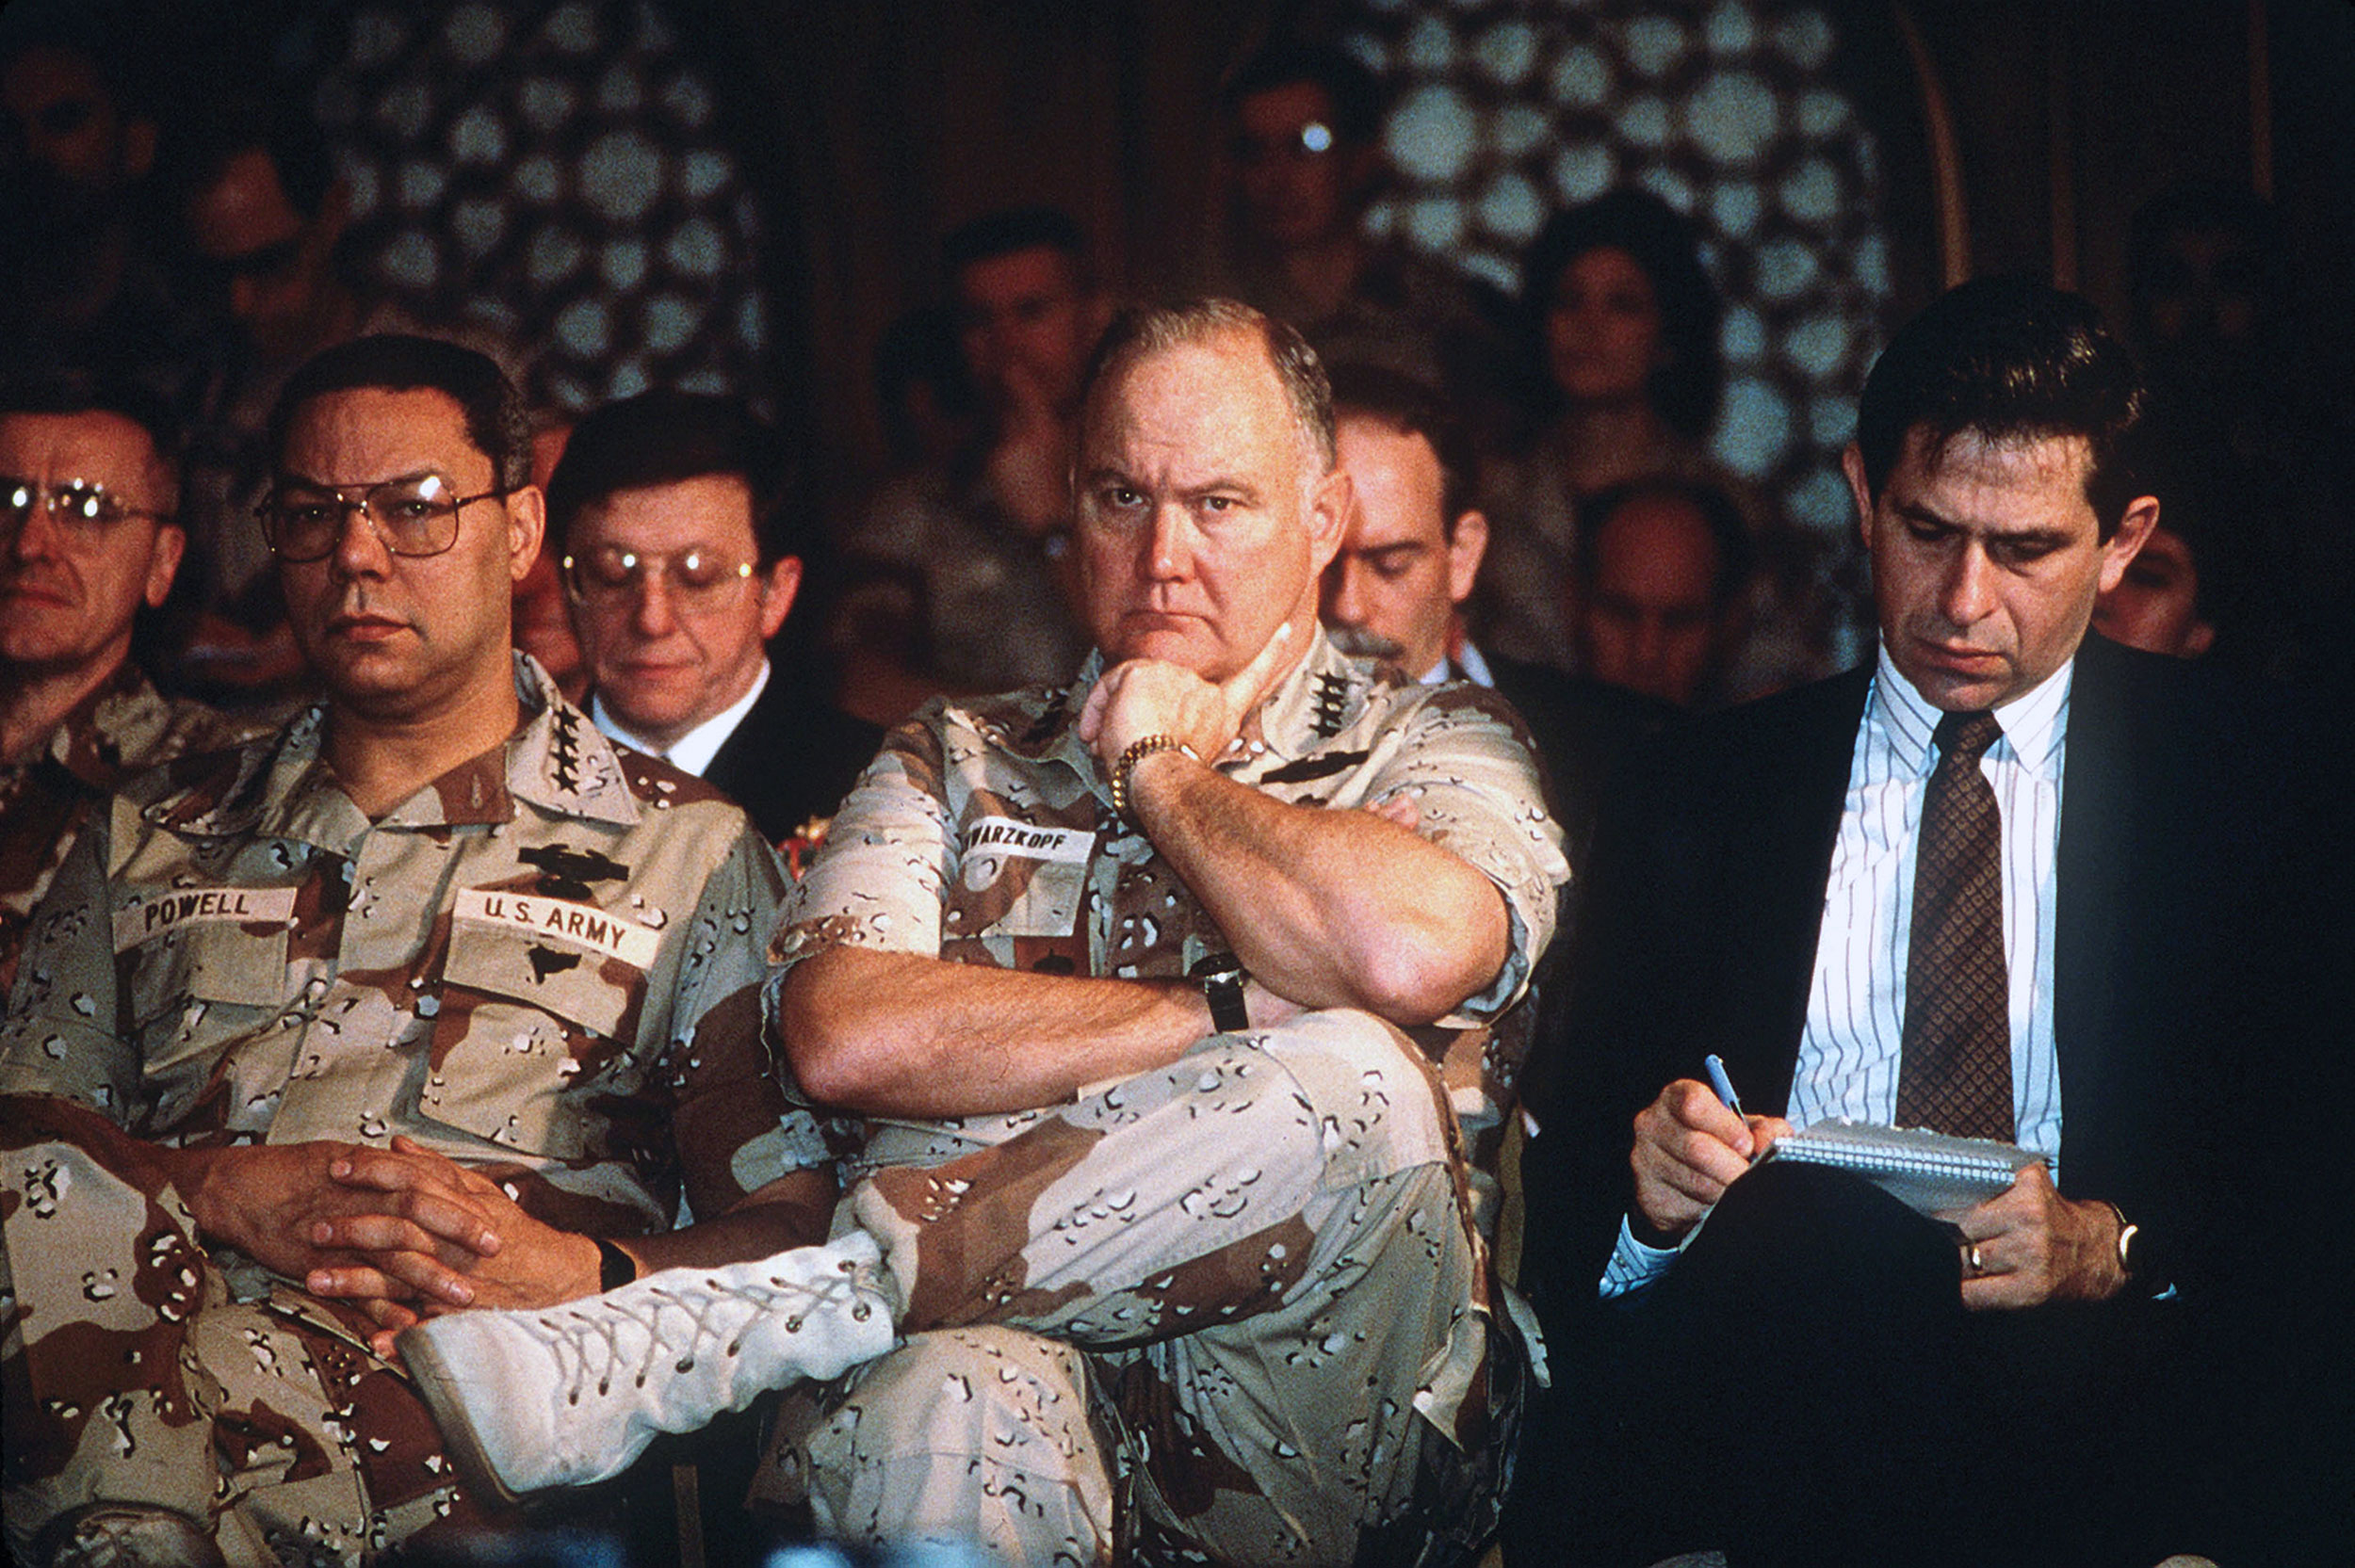 Paul D. Wolfowitz, Under Secretary of Defense for Policy, right, takes notes while General Colin Powell, Chairman of the Joint Chiefs of Staff; and General Norman Schwarzkopf, Commander-in-Chief, U.S. Central Command, take part in press conference held by U.S. and Saudi Arabian officials during Operation Desert Storm, circa February 1991